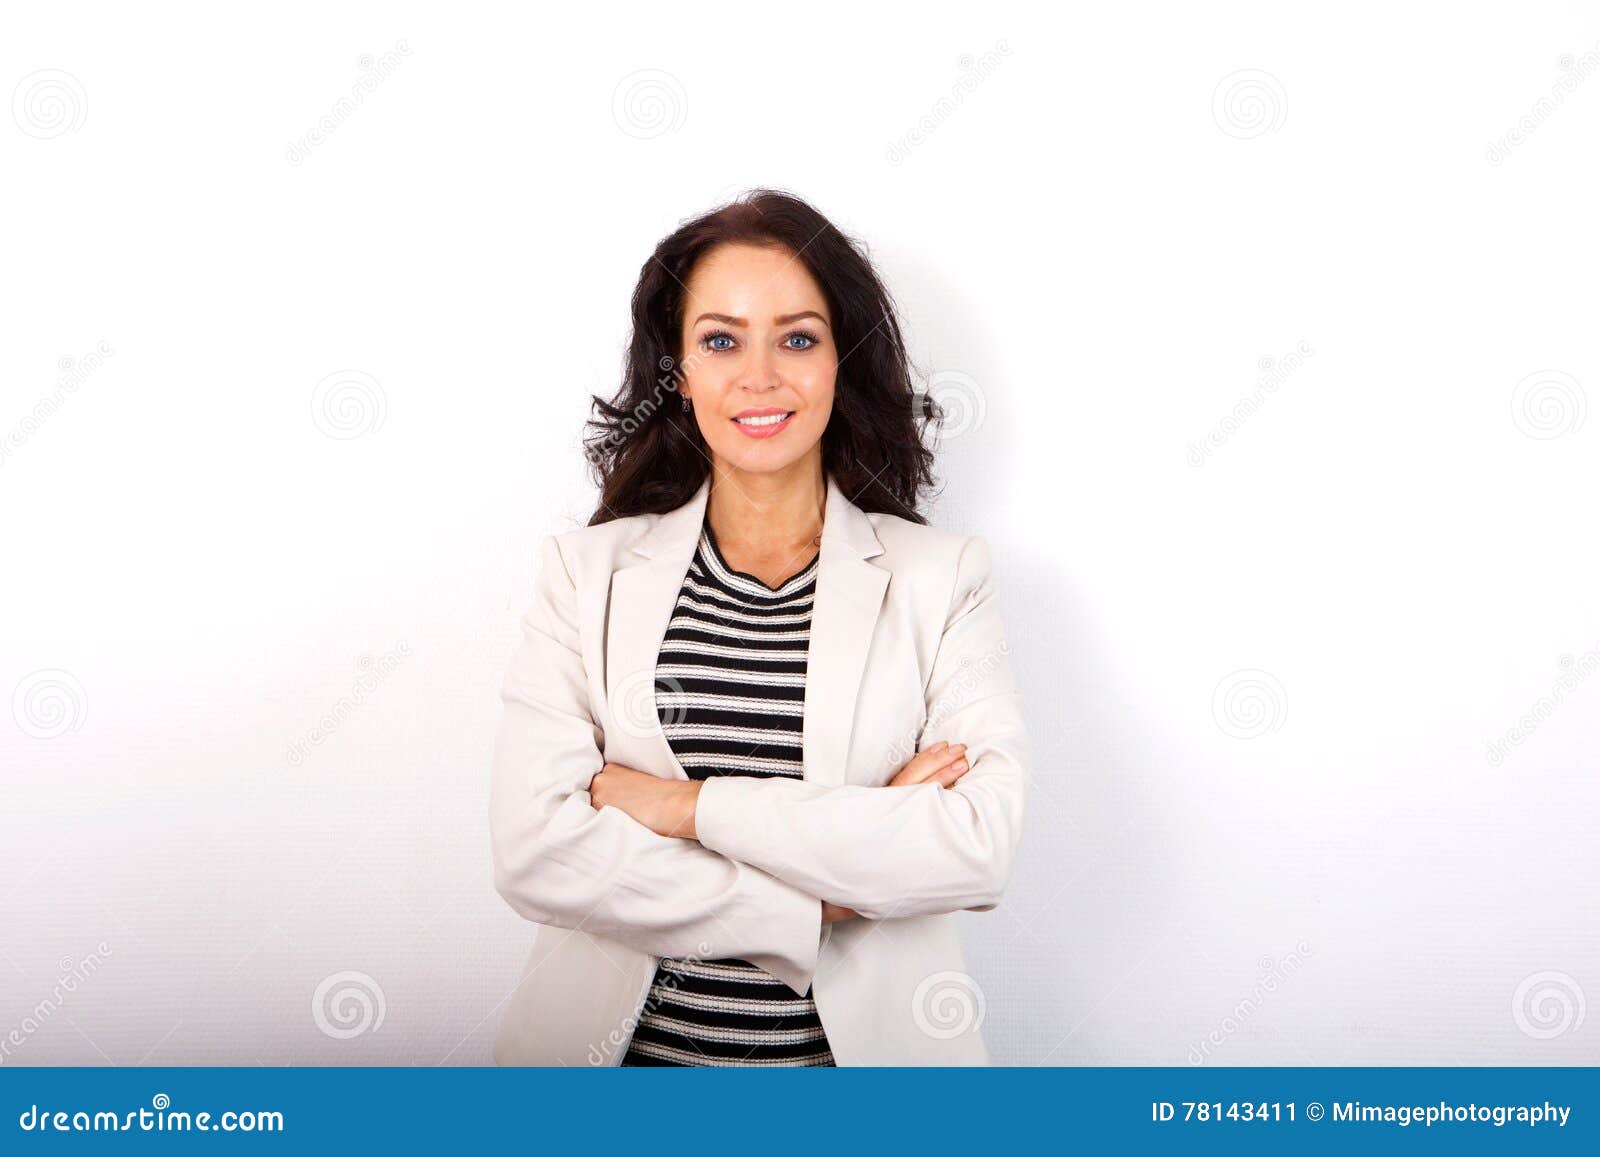 business casual woman standing  on white background